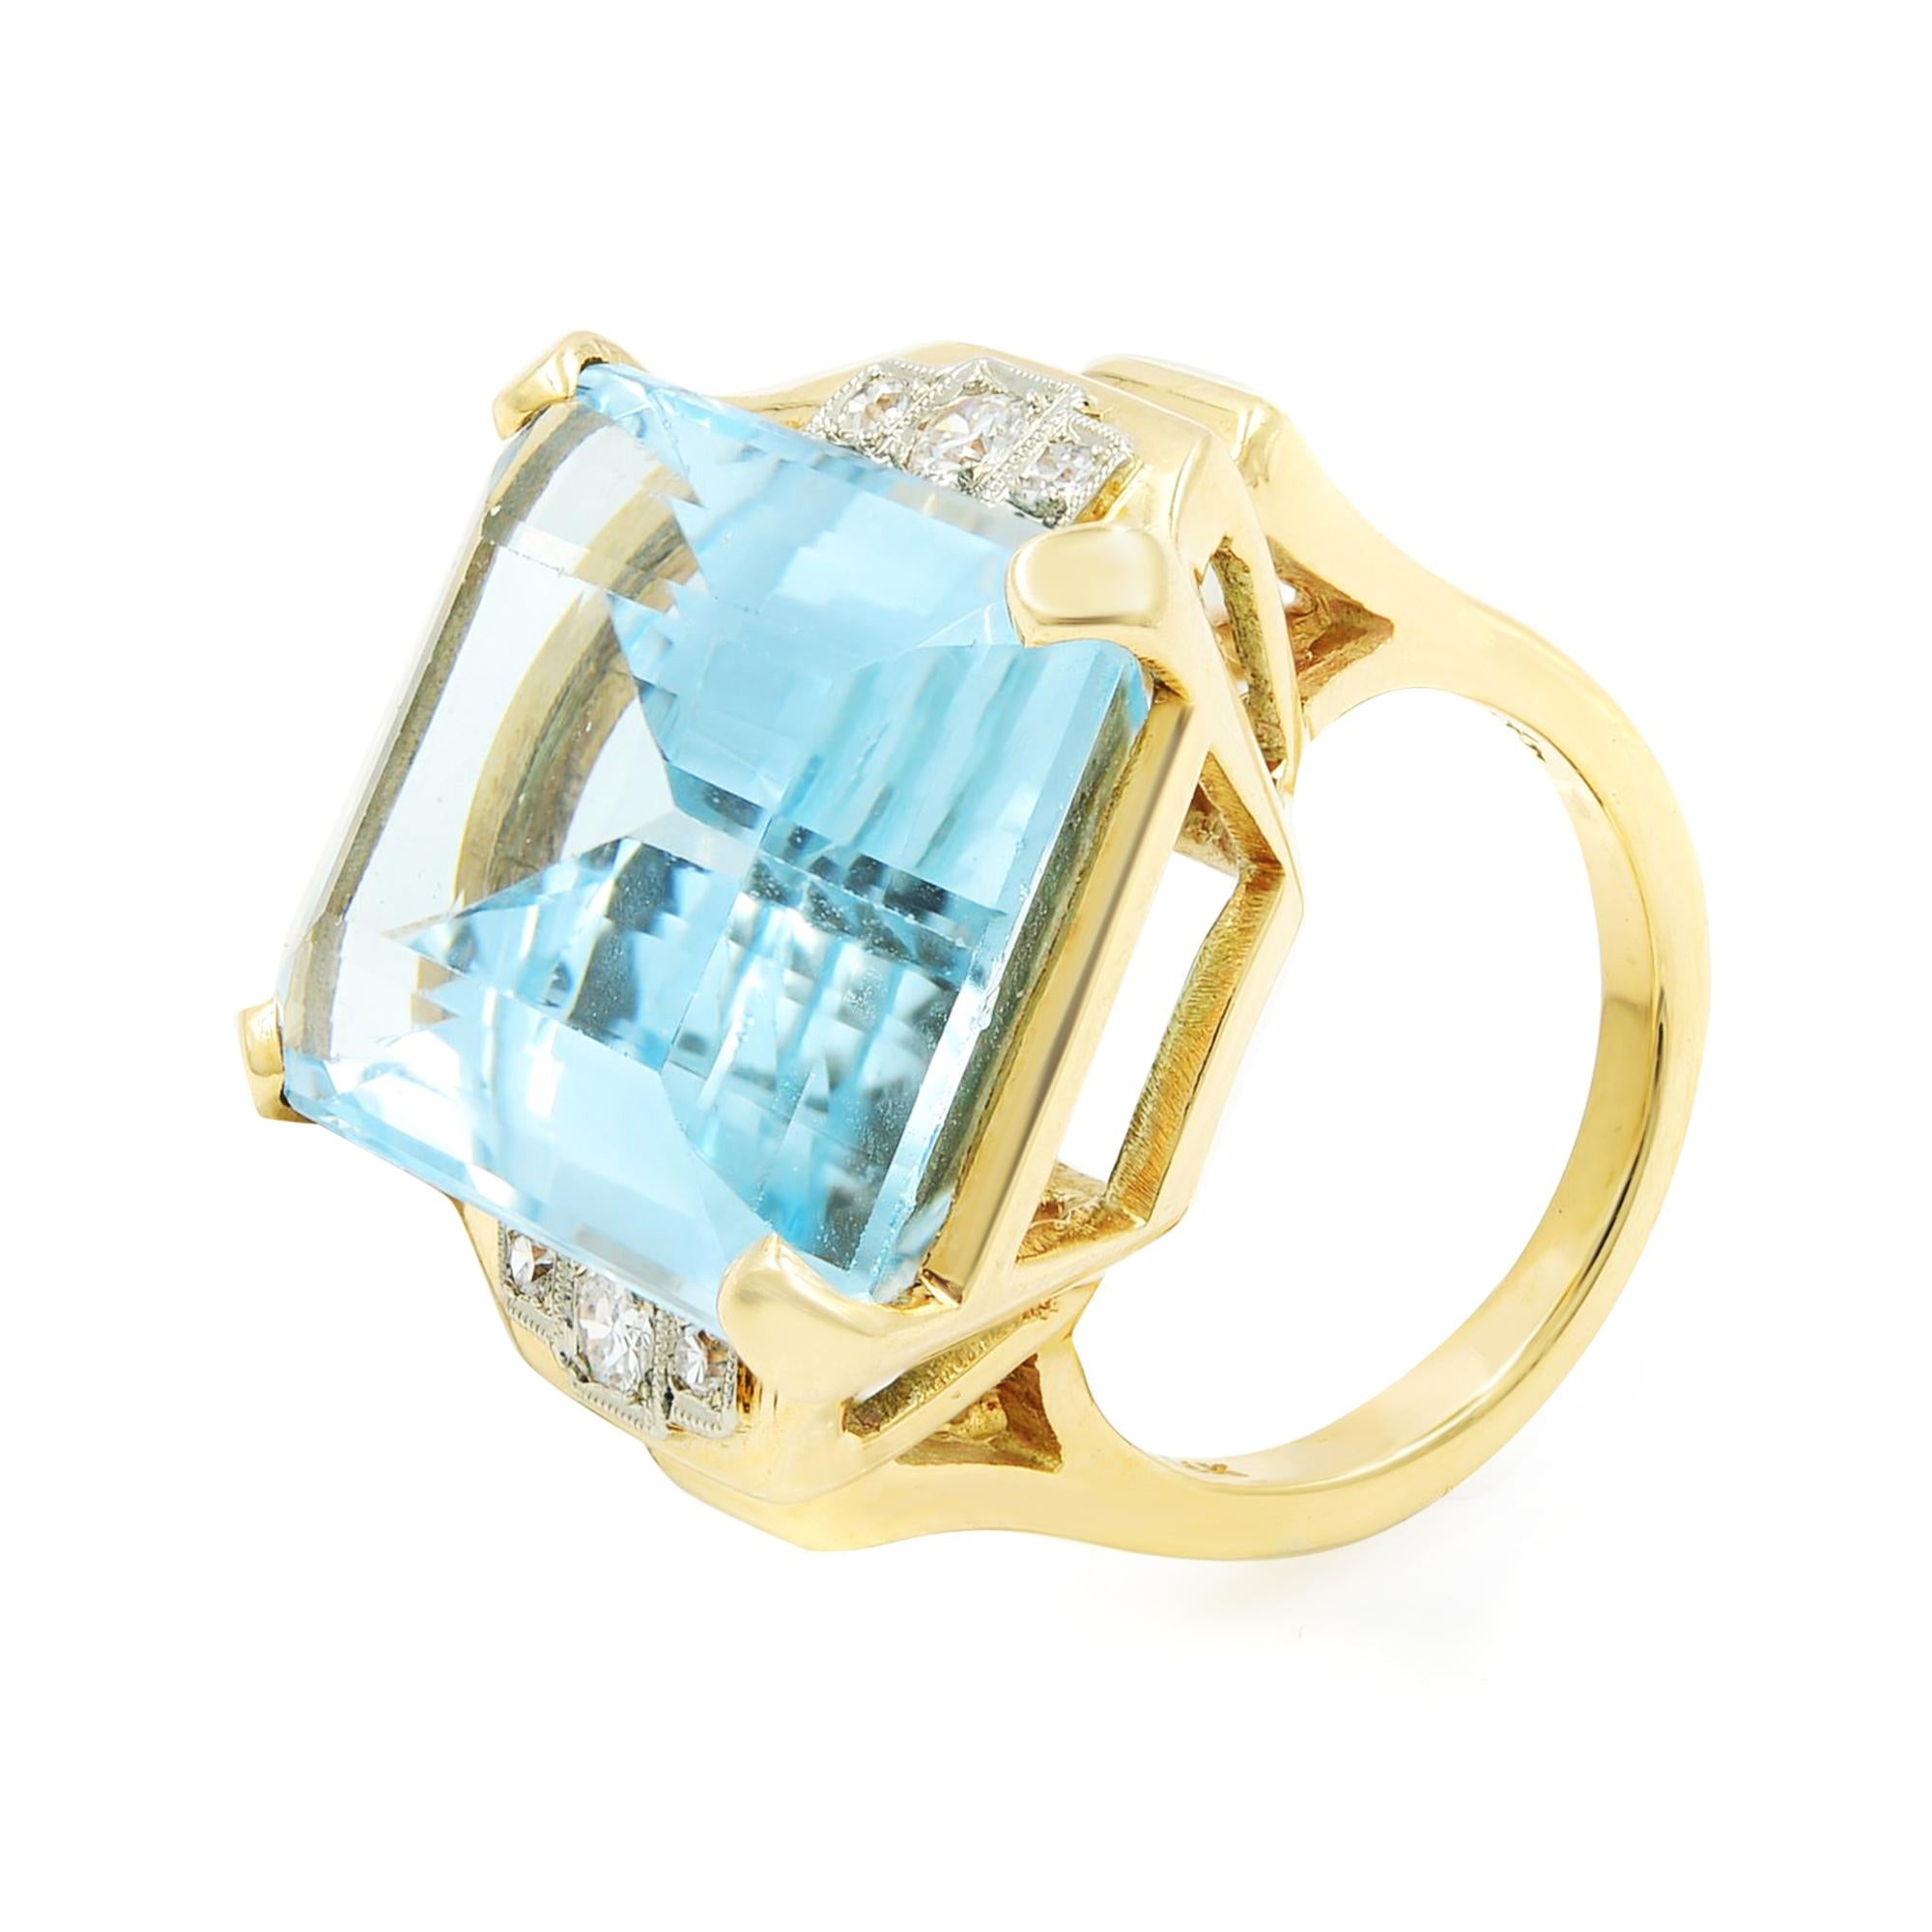 Large Emerald Cut Aquamarineand Diamond Ring 23.76Cts 14K Yellow Gold In New Condition For Sale In New York, NY